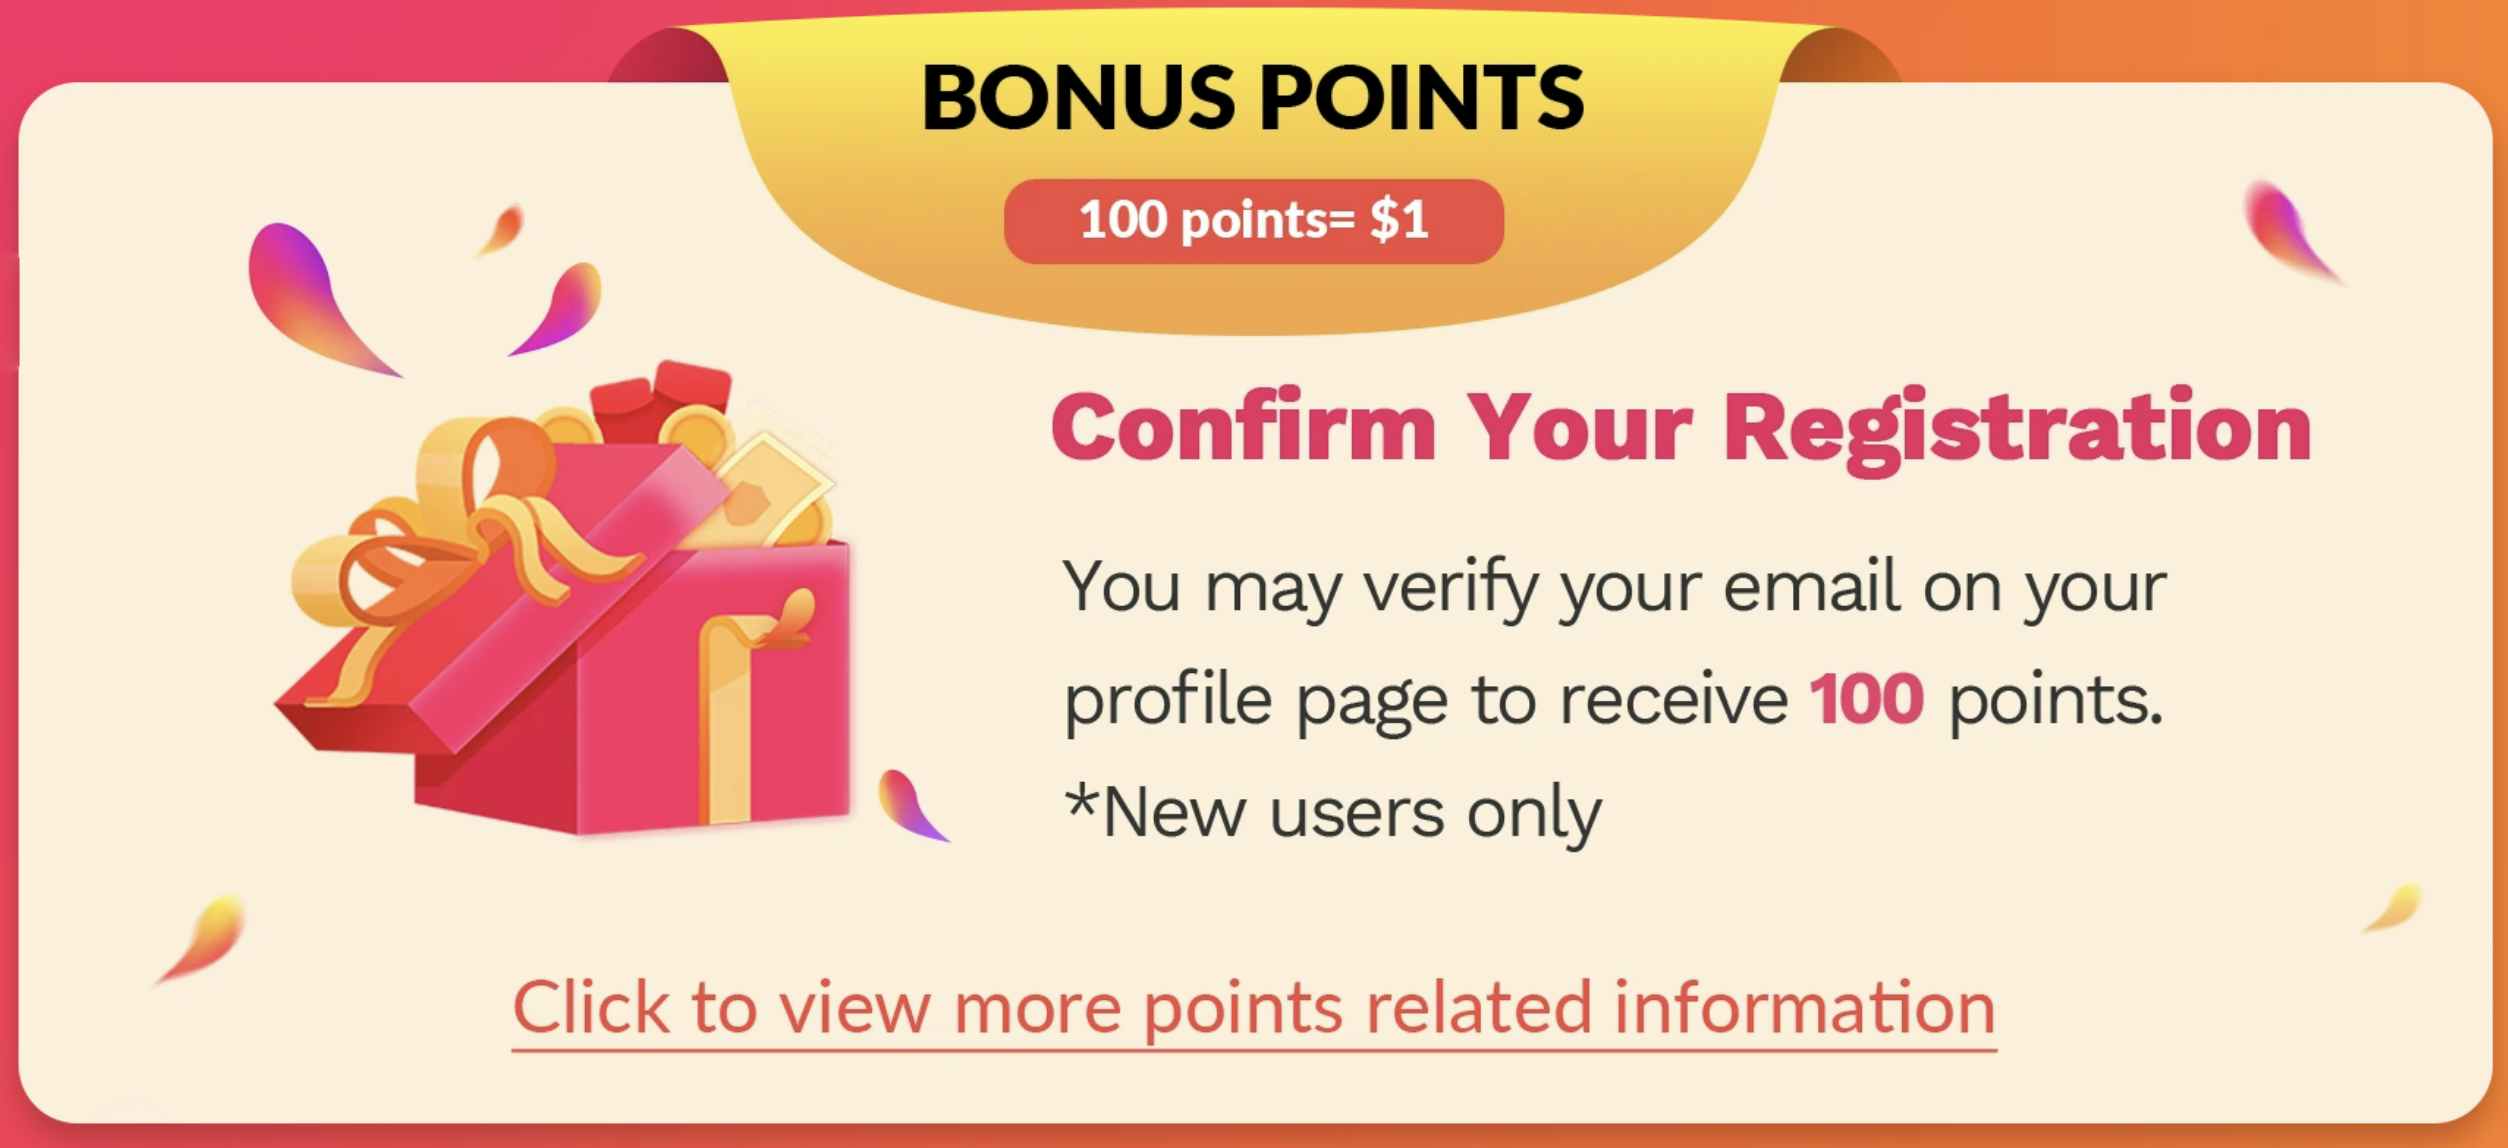 A screenshot of a graphic from the SHEIN website showing an offer of 100 Bonus Points for confirming registration by verifying your email address.